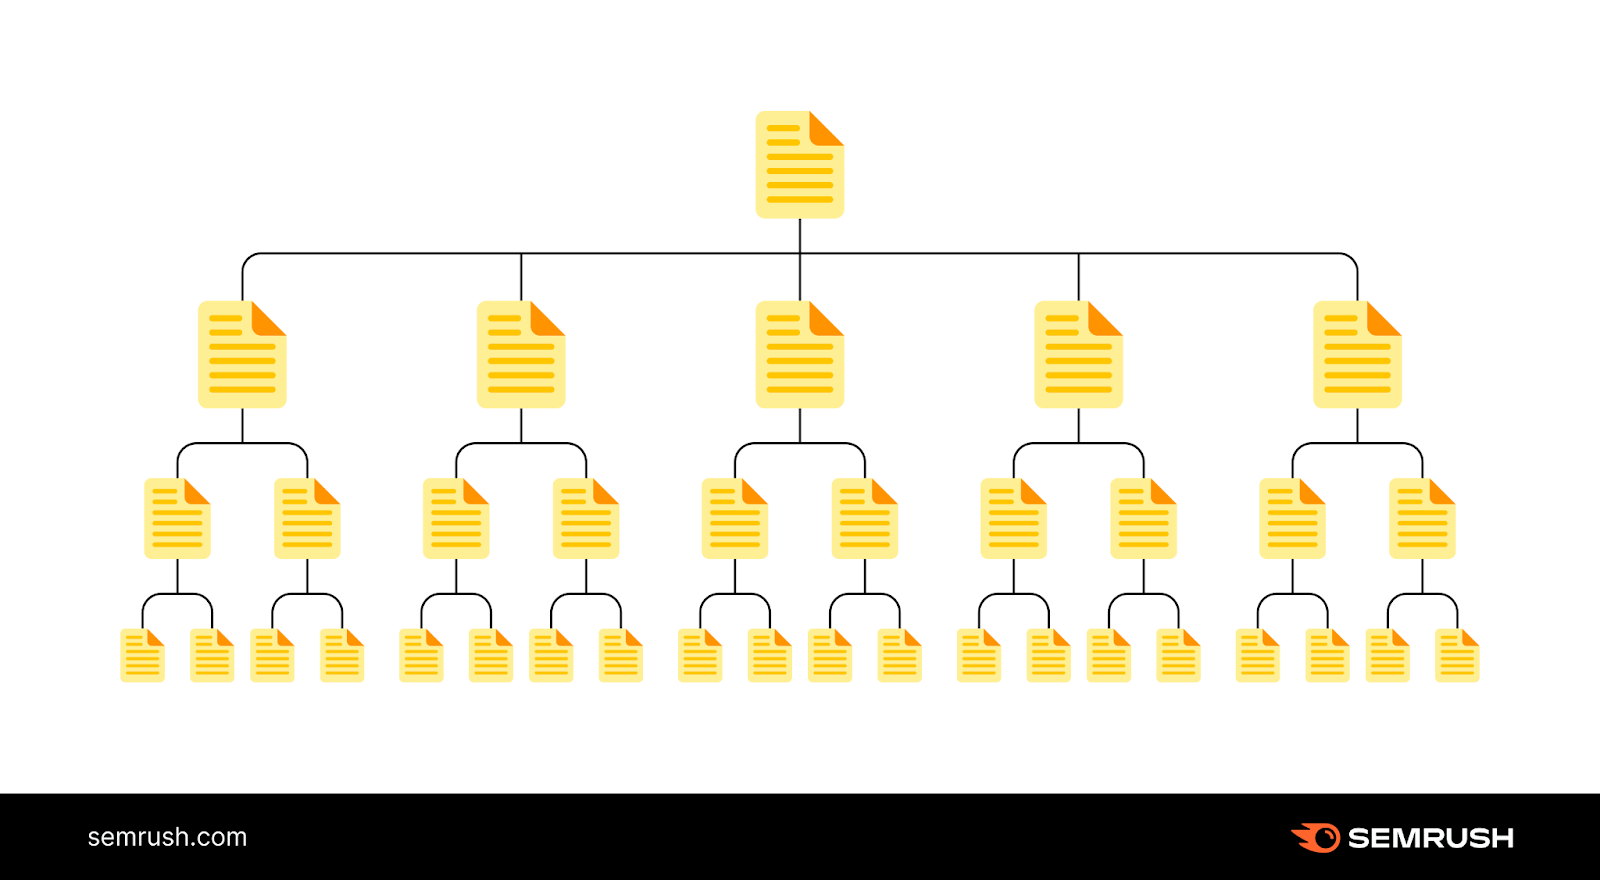 A hierarchical website structure